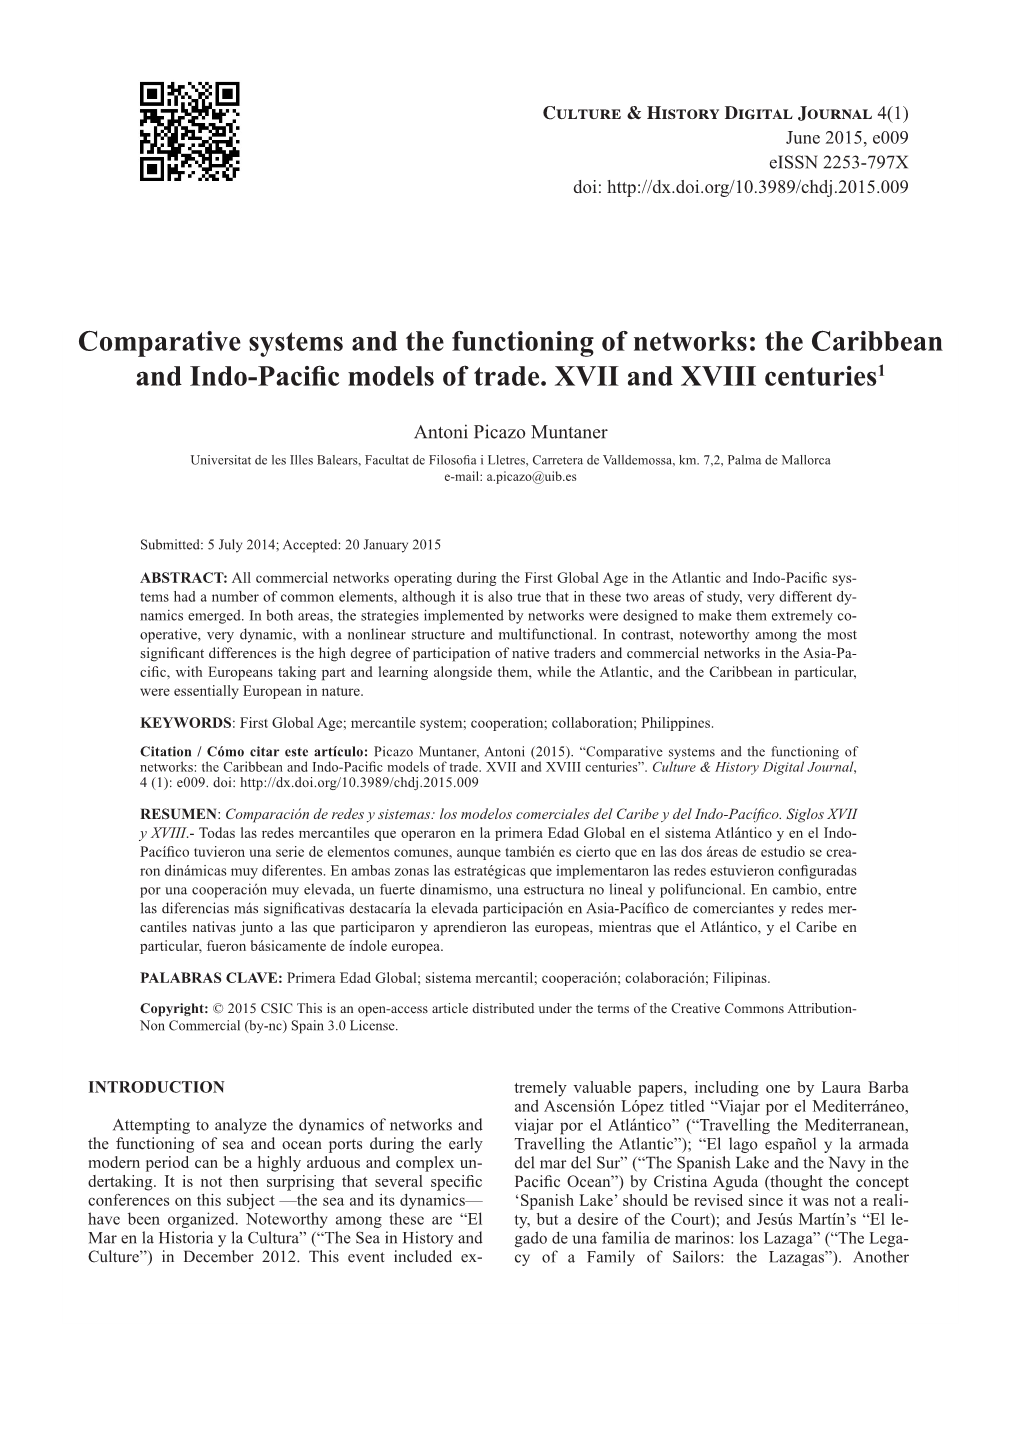 The Caribbean and Indo-Pacific Models of Trade. XVII and XVIII Centuries1